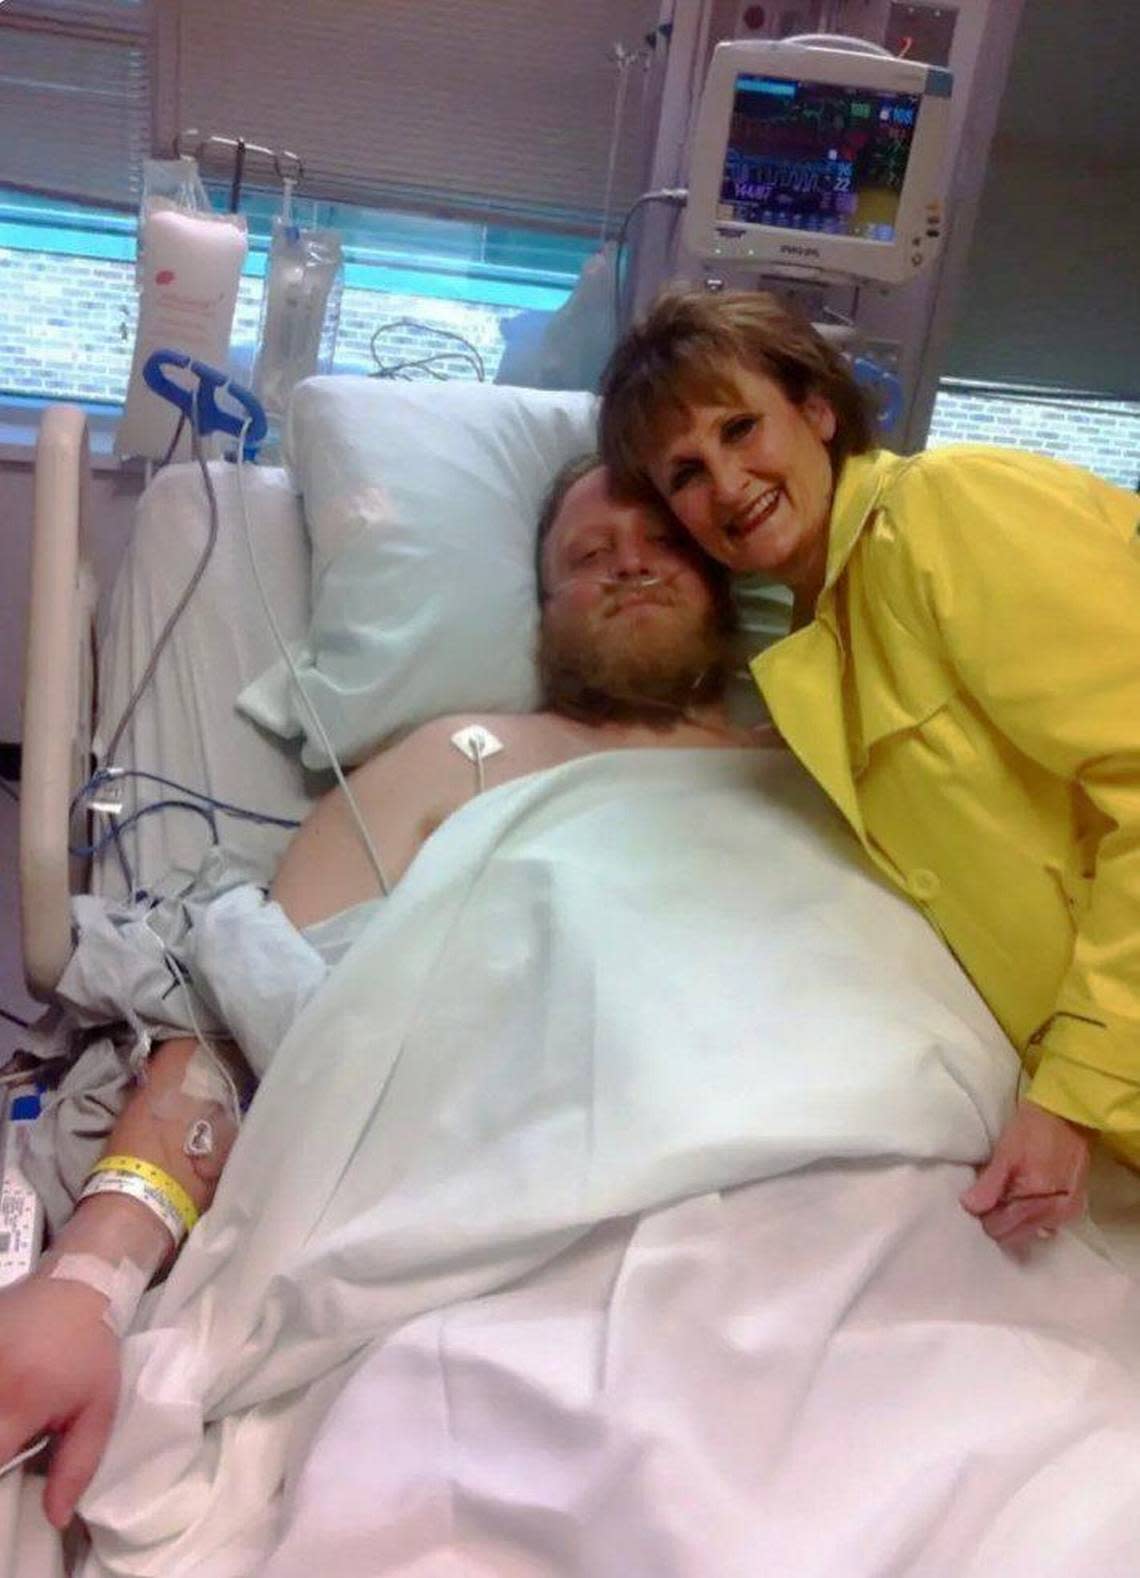 In March 2015, Susan Faseler visited her son, Jimmy Faseler, at Truman Medical Center as he recovered from a gunshot wound during a burglary.